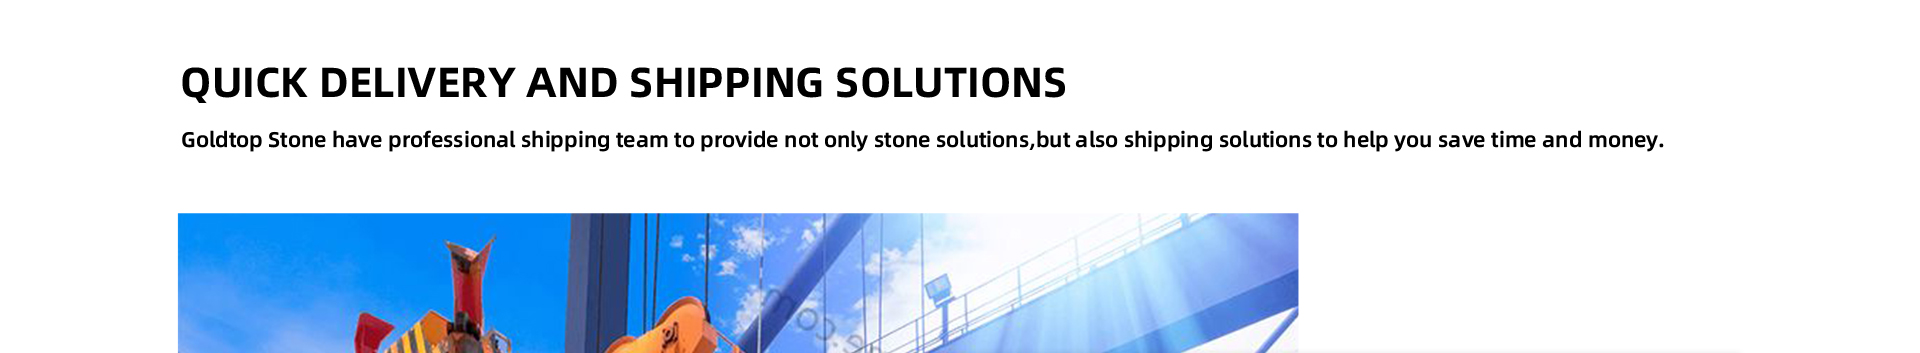 QUICK DELIVERY AND SHIPPIING SOLUTIONS Goldtop Stone have professional shippiing team to provide not only stone solutions,but also shippinig solutions to help you save time and money